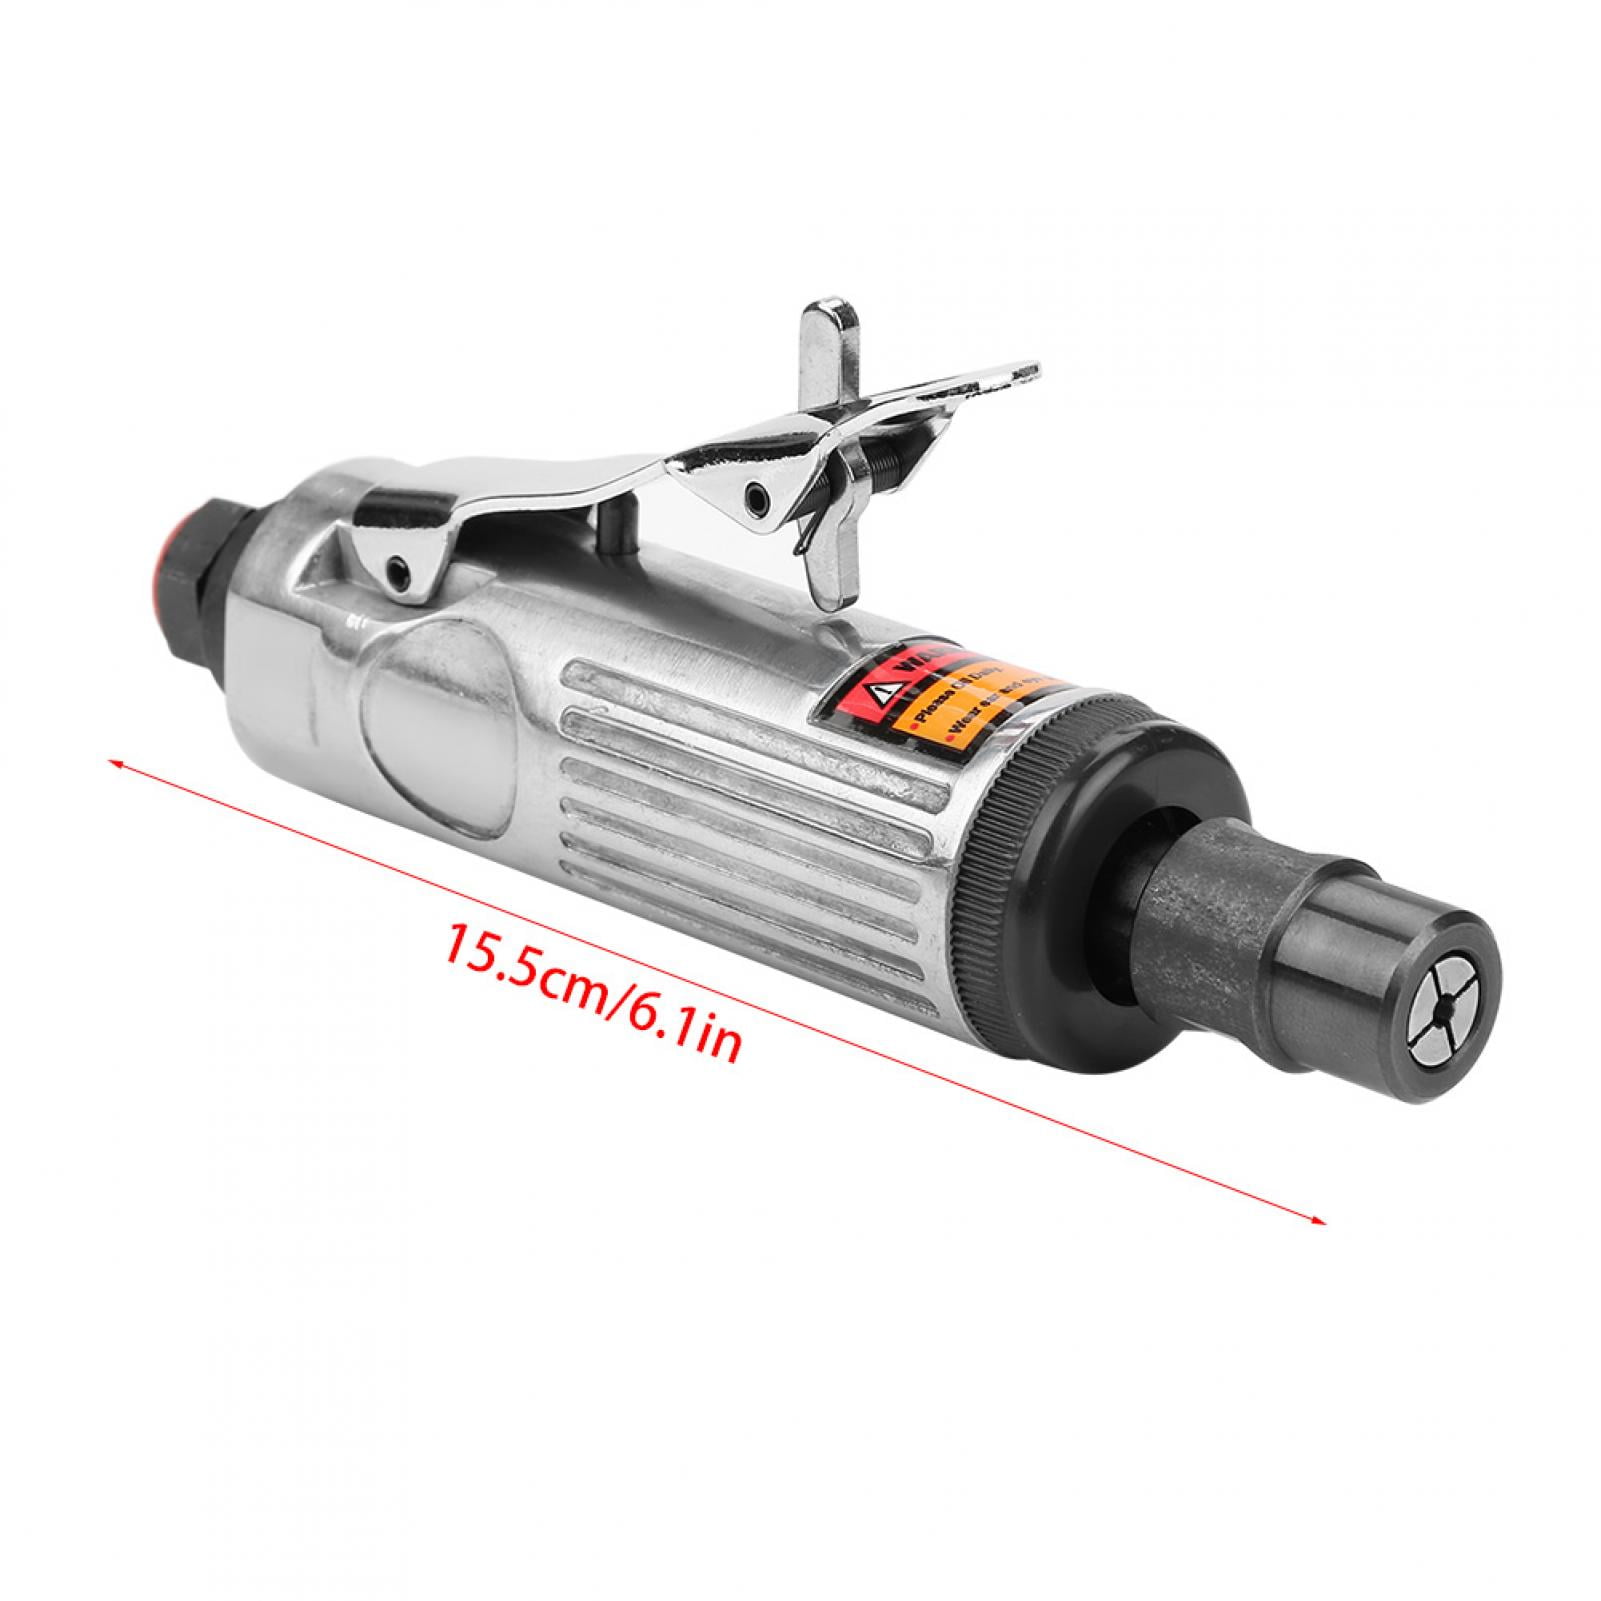 3" Mini Air Angle Grinder Cut Off Grinding Cutting Pneumatic Polisher Auto Body 